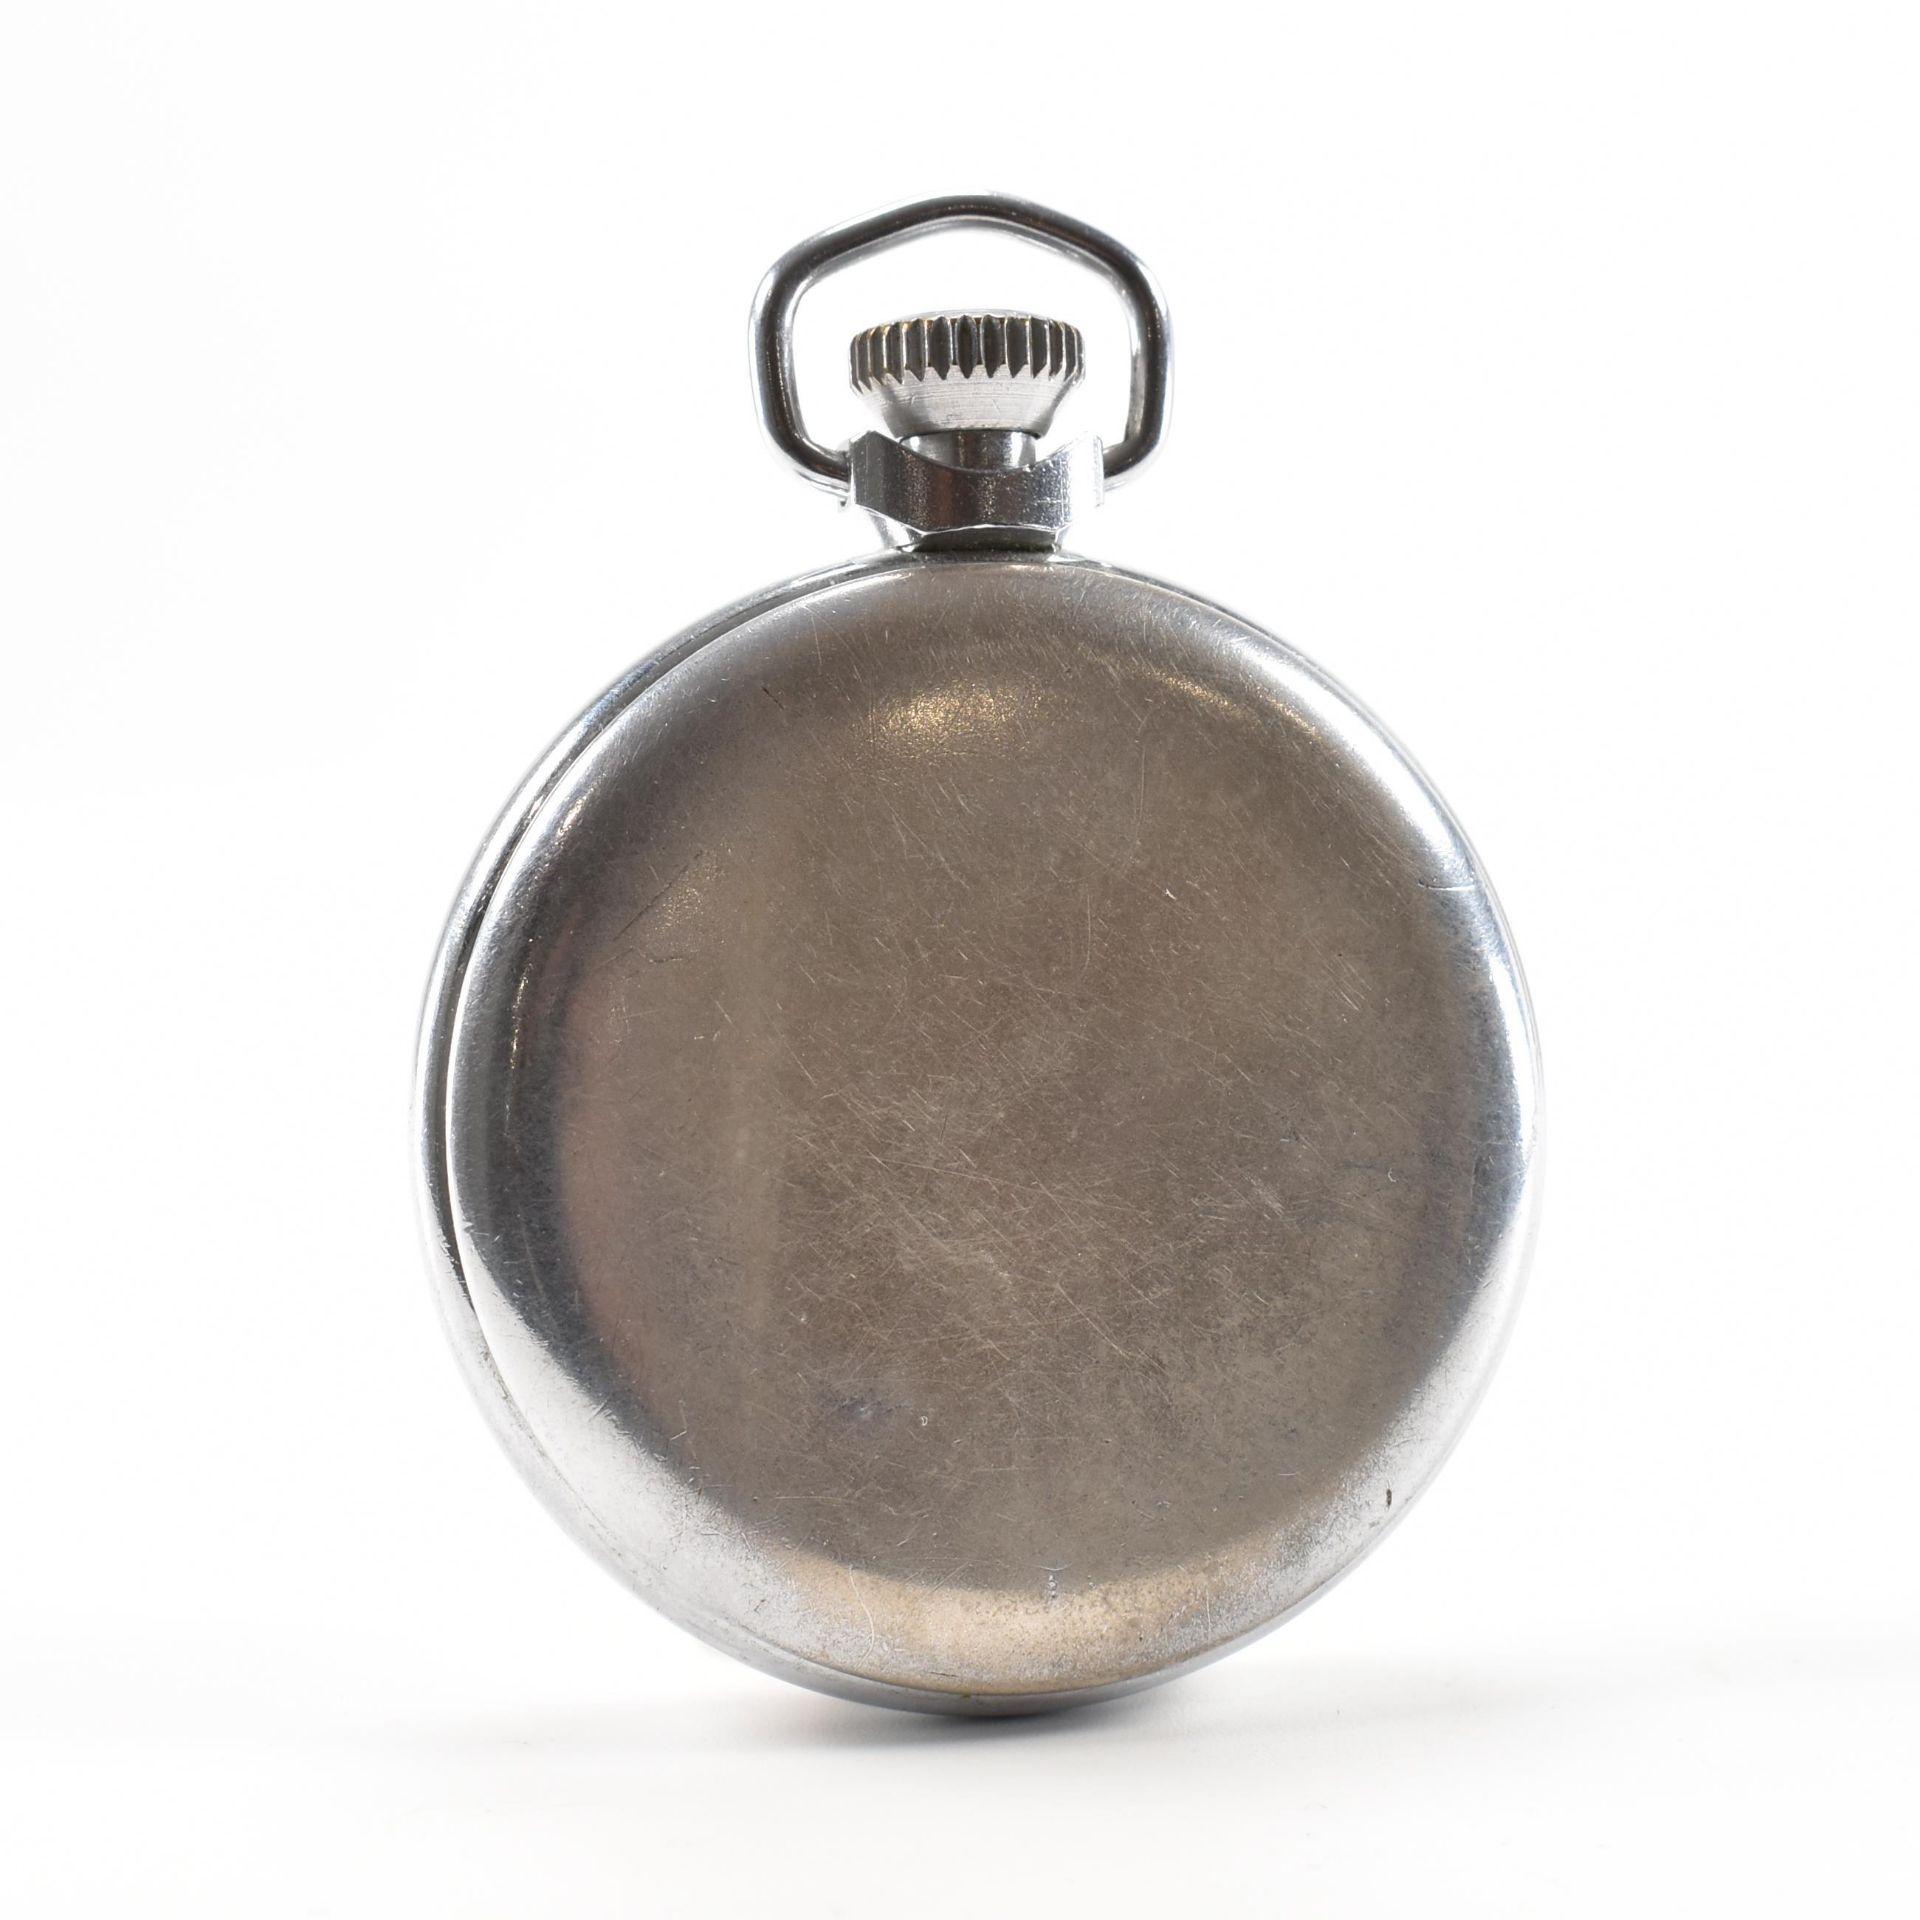 VINTAGE GUINNESS TIME ADVERTISING POCKET WATCH - Image 2 of 4